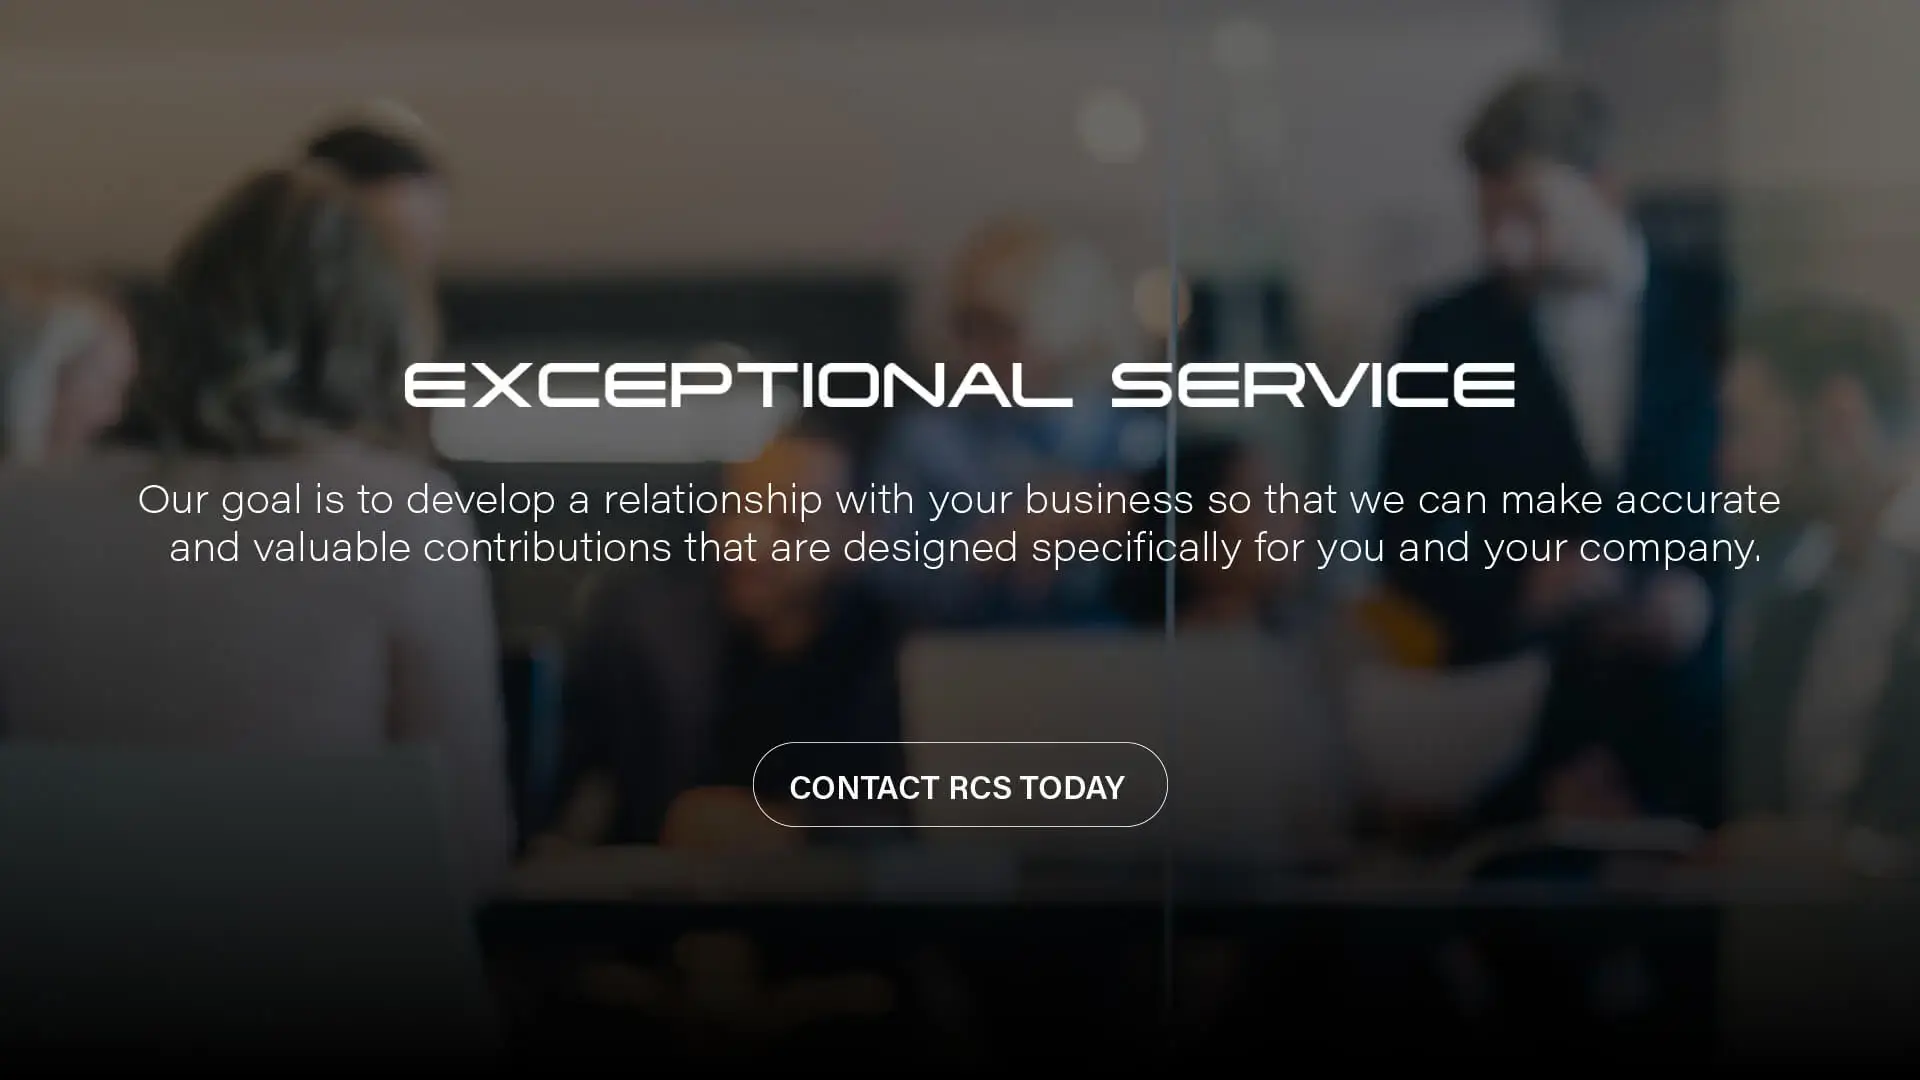 Exceptional Service | Our goal is to develop a relationship with your business so that we can make accurate and valuable contributions that are designed specifically for you and your company.